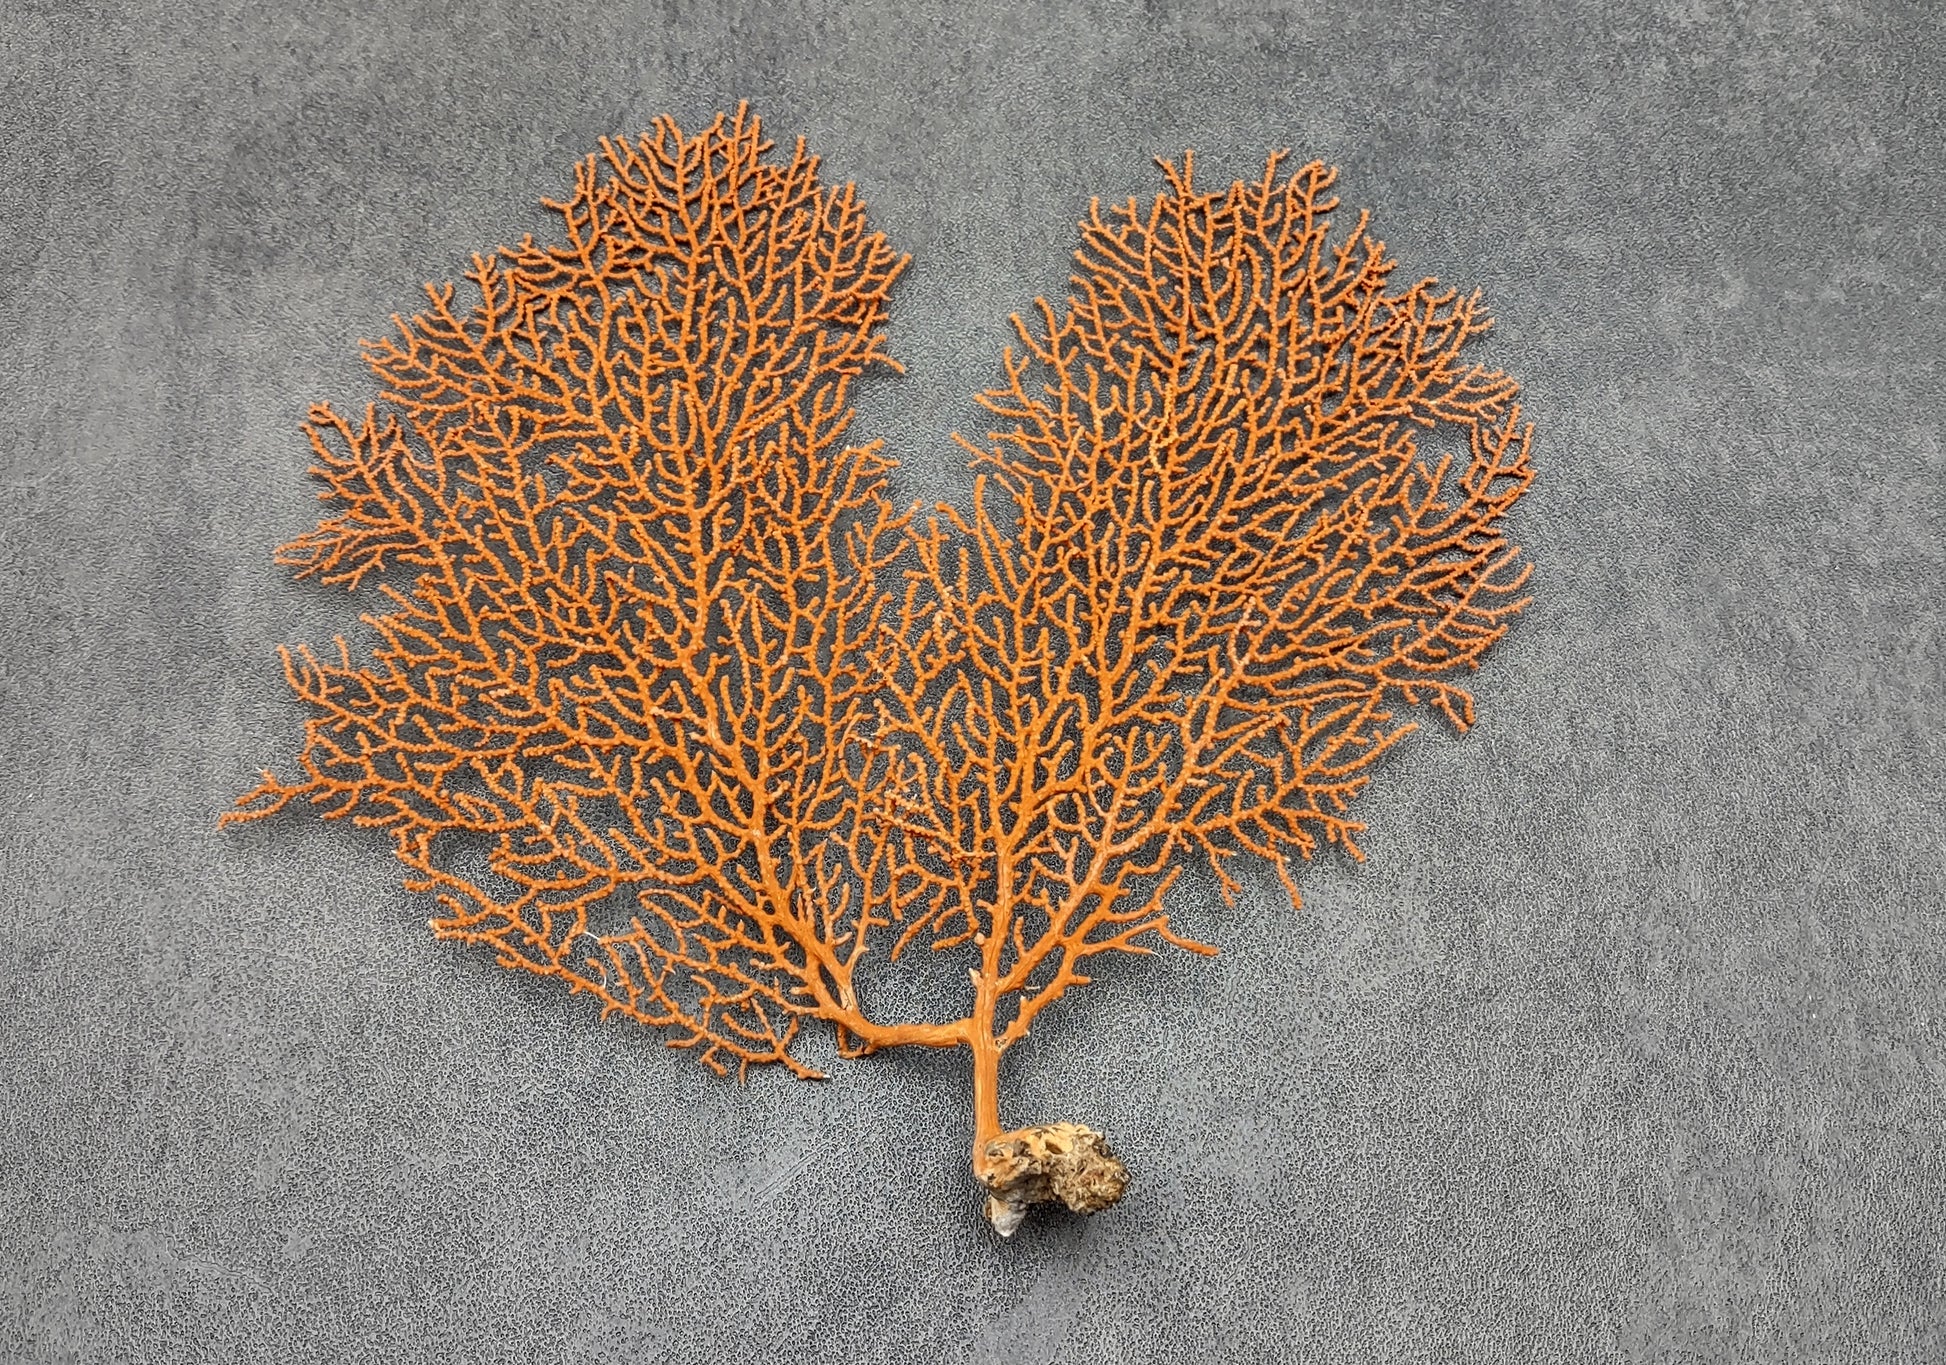 Red-Orange Sea Fan Coral - Echinogorgia SP - (1 seafan approx. 5-7 inches)  Great for ocean décor display, art projects, crafts & collecting!